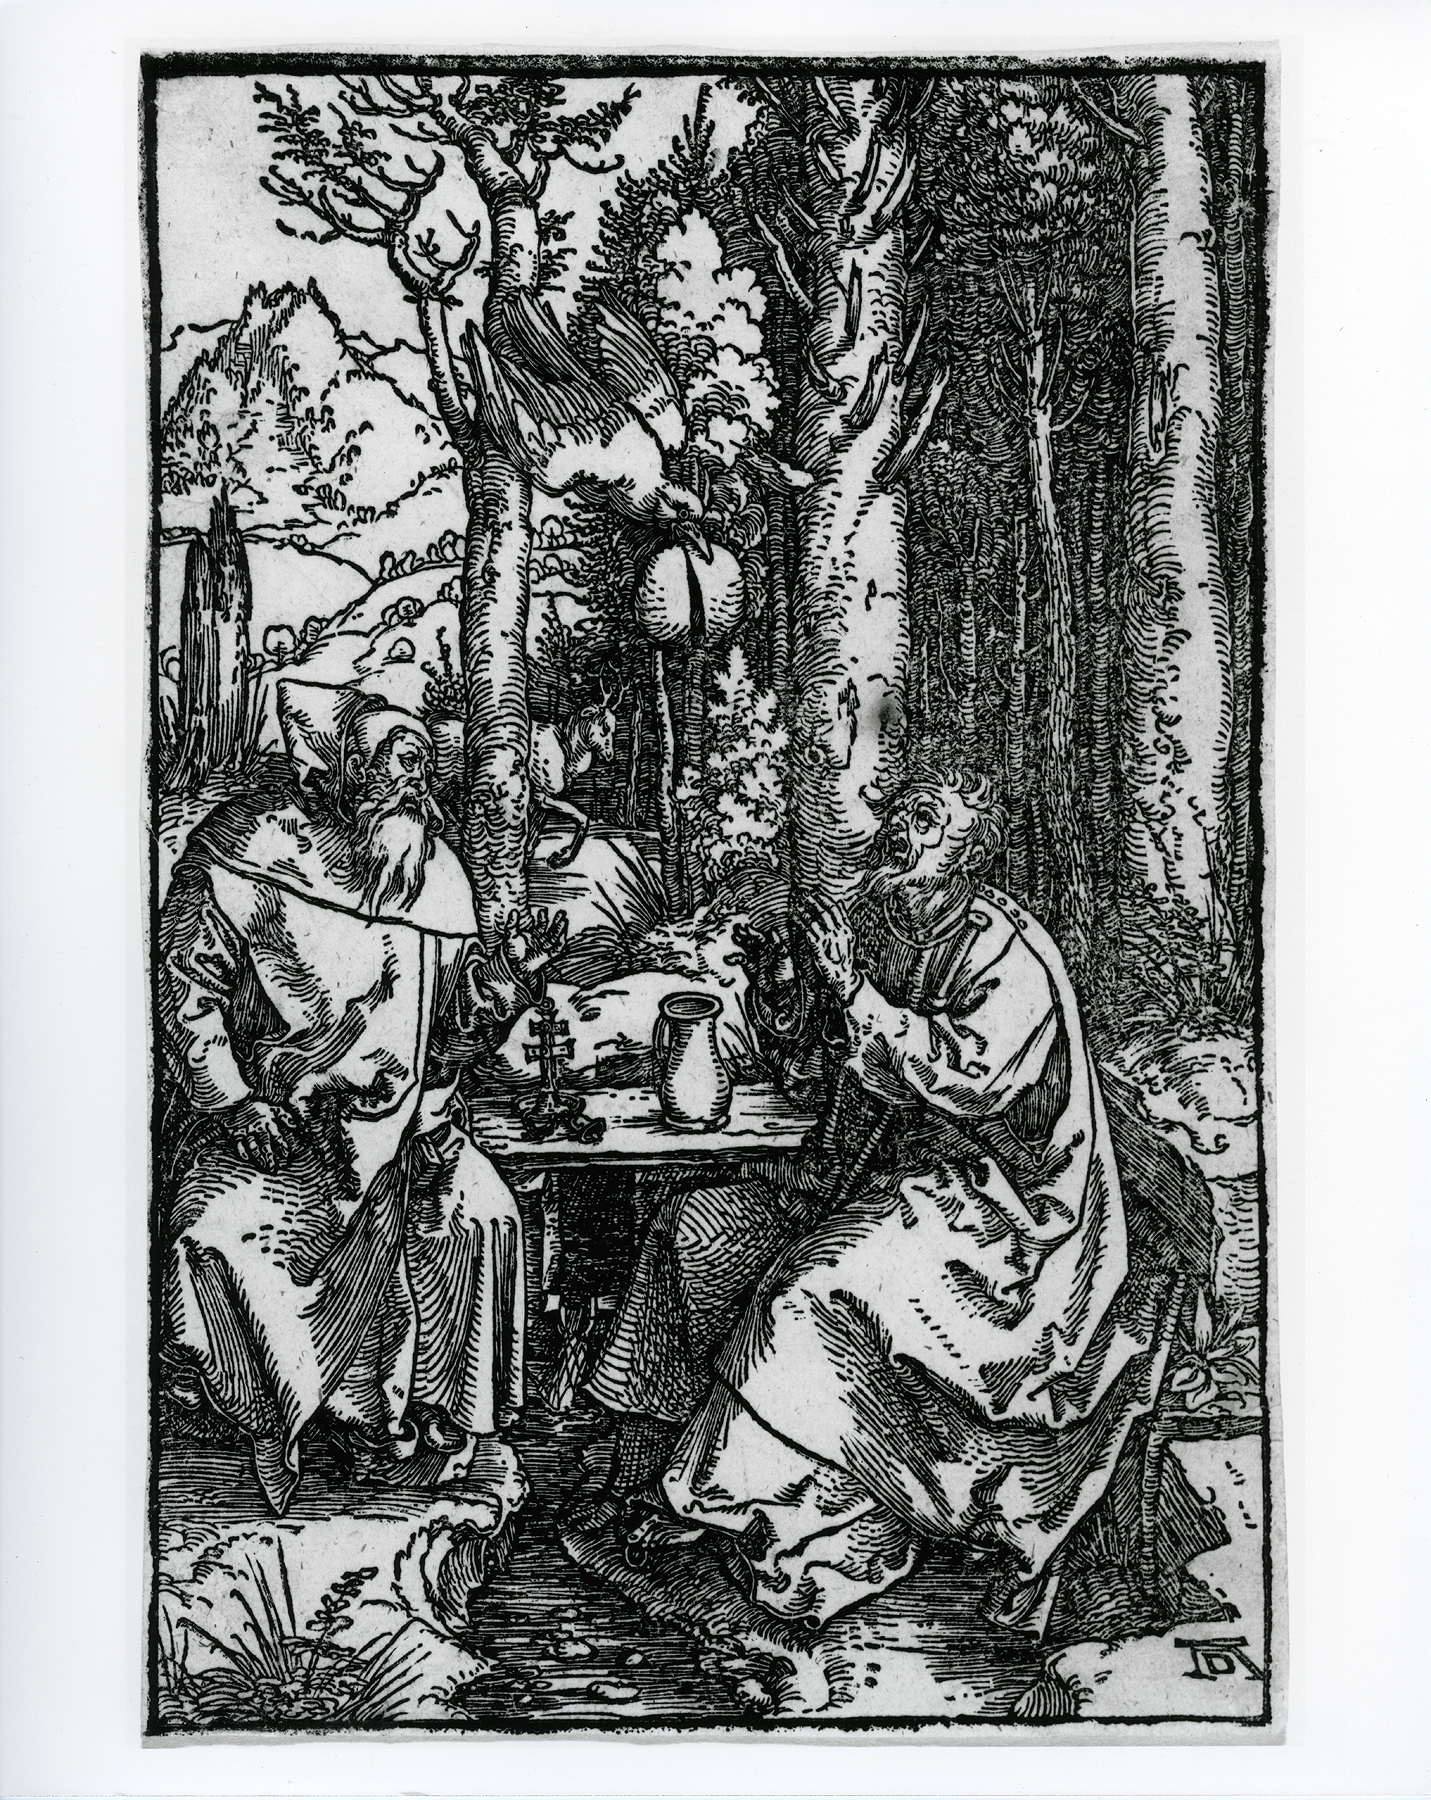 Albrecht Dürer (German, 1471–1528), The Hermits St. Anthony and St. Paul in the Desert, ca. 1504. Woodcut. Milwaukee Art Museum, Maurice and Esther Leah Ritz Collection M2004.179. Photo credit: Efraim Lev-er.